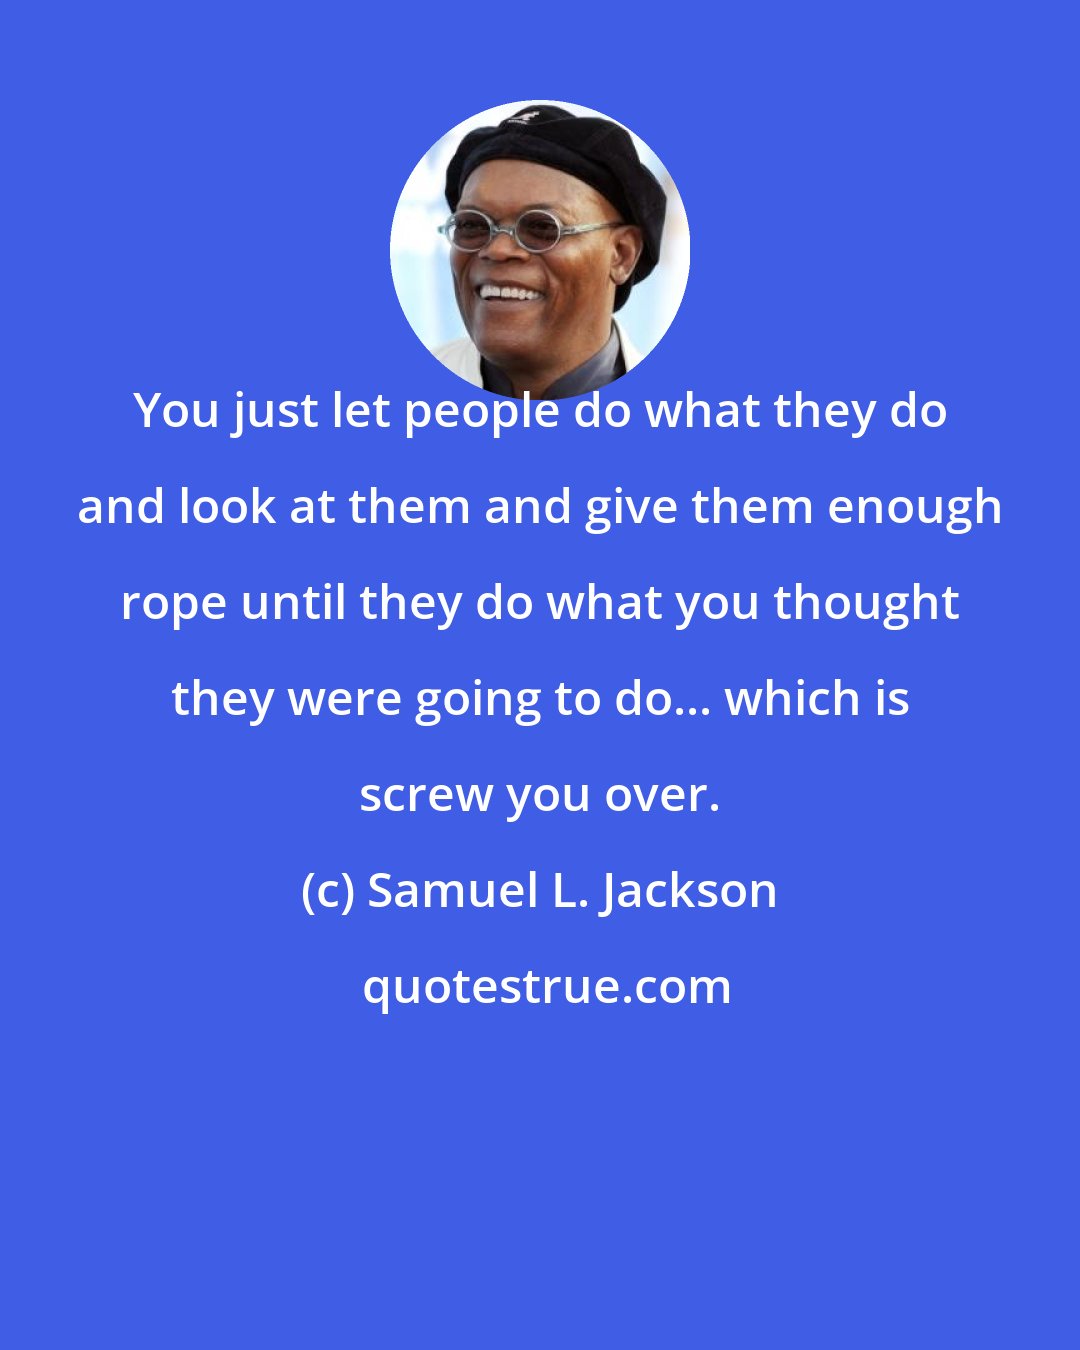 Samuel L. Jackson: You just let people do what they do and look at them and give them enough rope until they do what you thought they were going to do... which is screw you over.